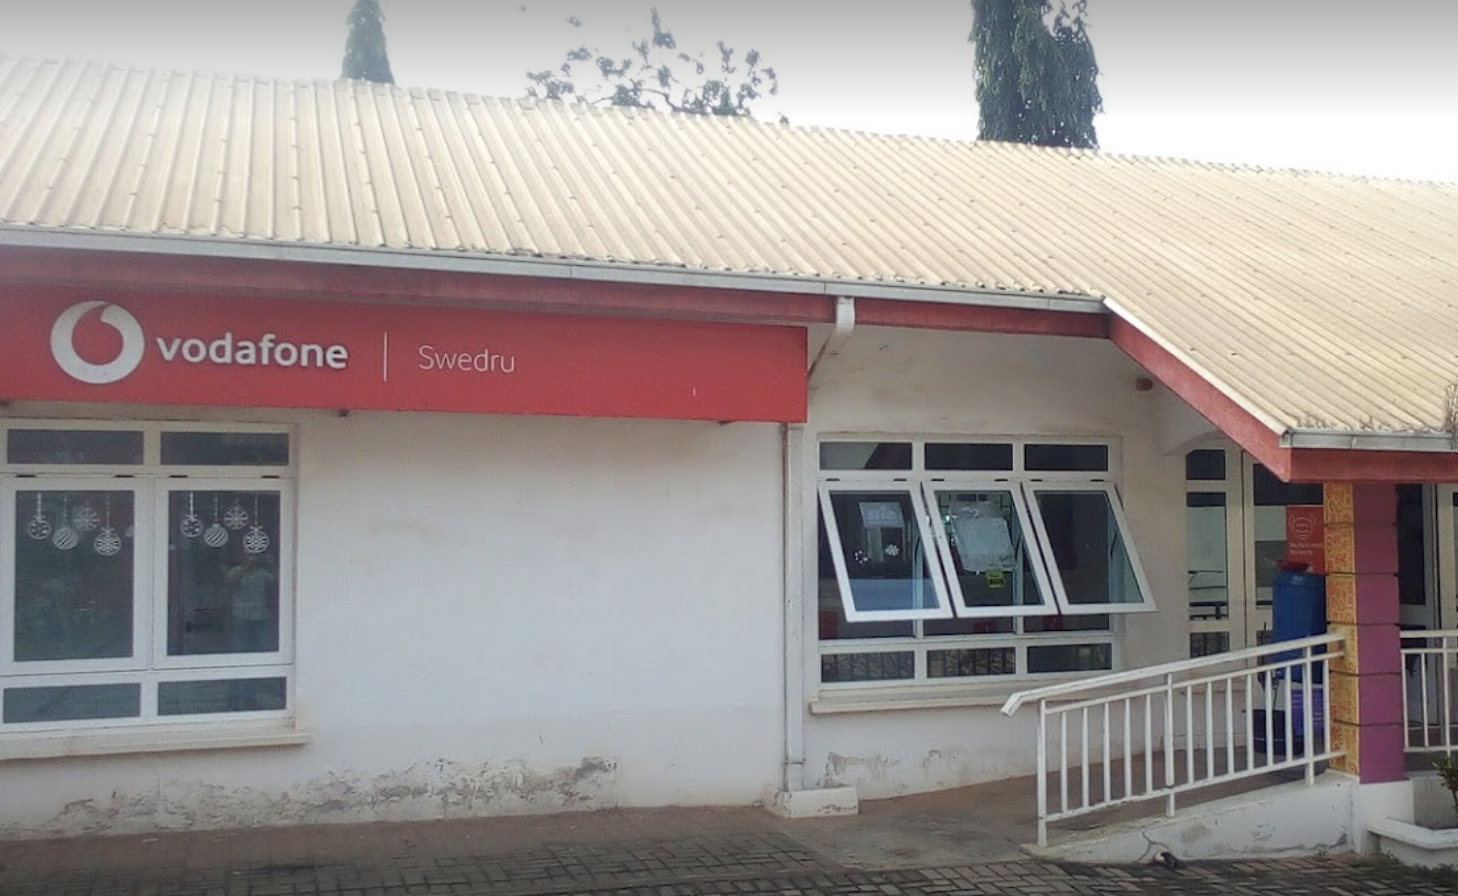 Vodafone Offices In Central Region